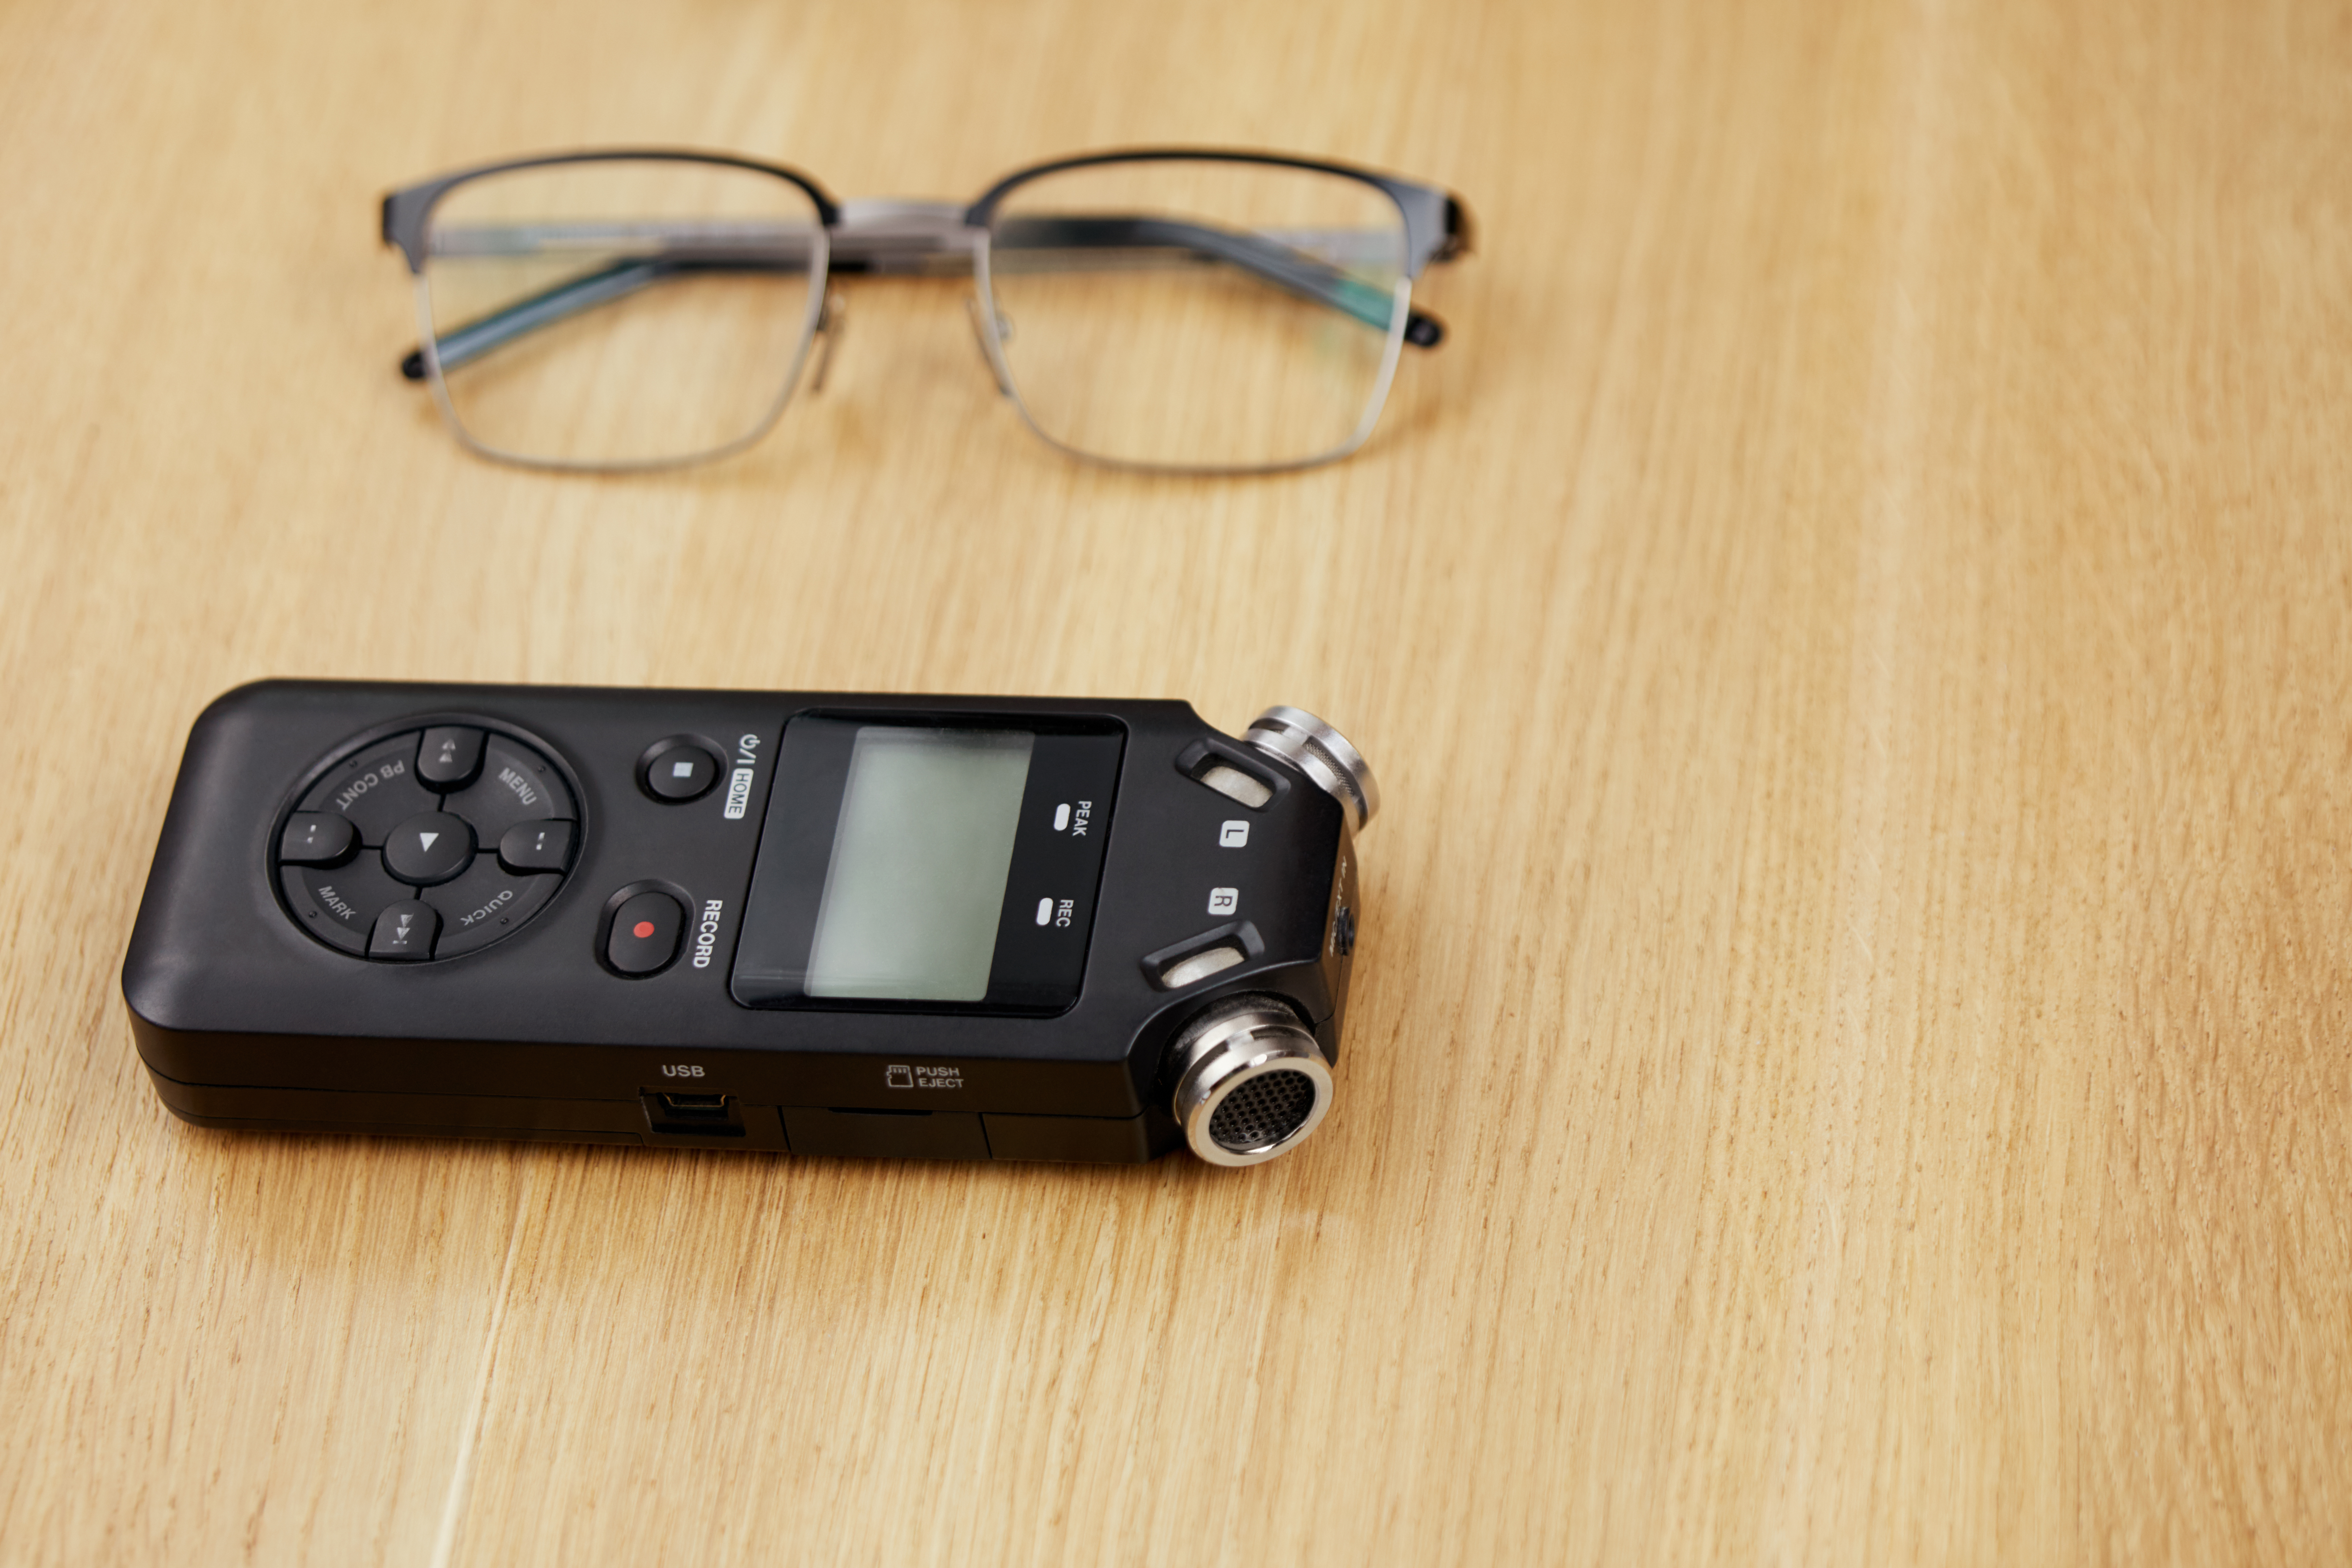 Audio recorder and spectacles lying on a table top | Source: Shutterstock